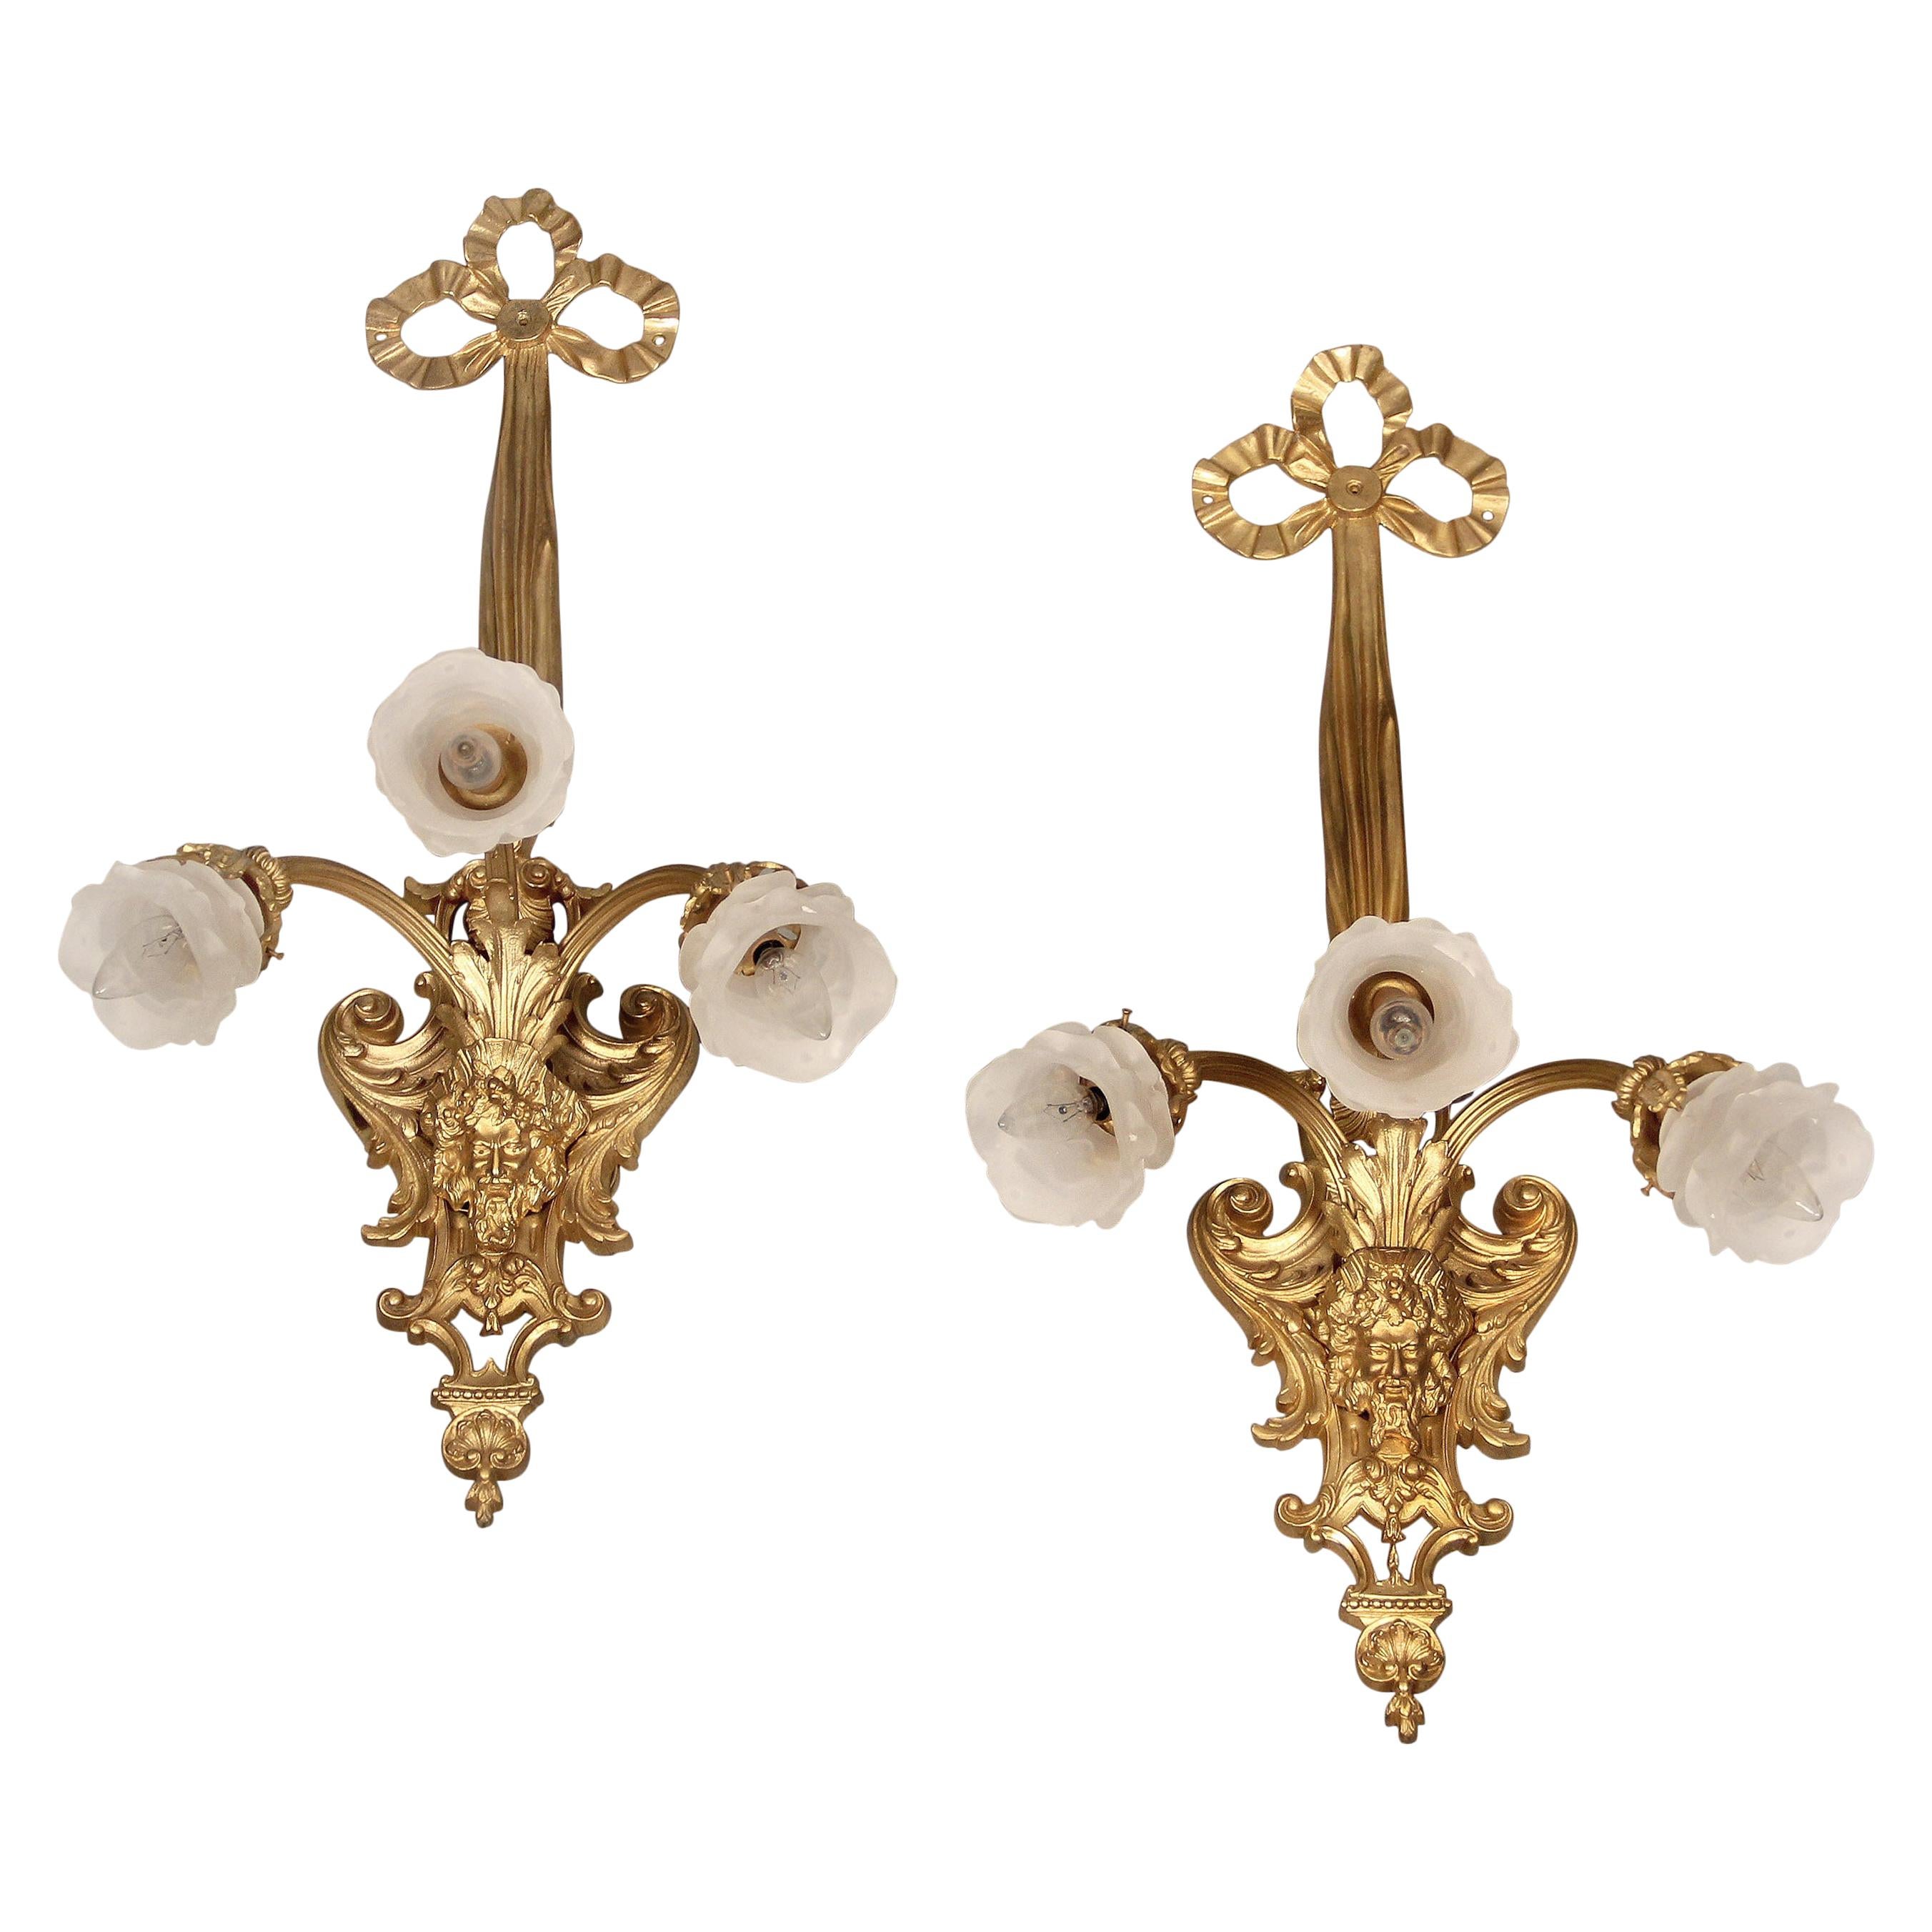 Excellent Pair of Late 19th Century Gilt Bronze Three-Light Sconces For Sale